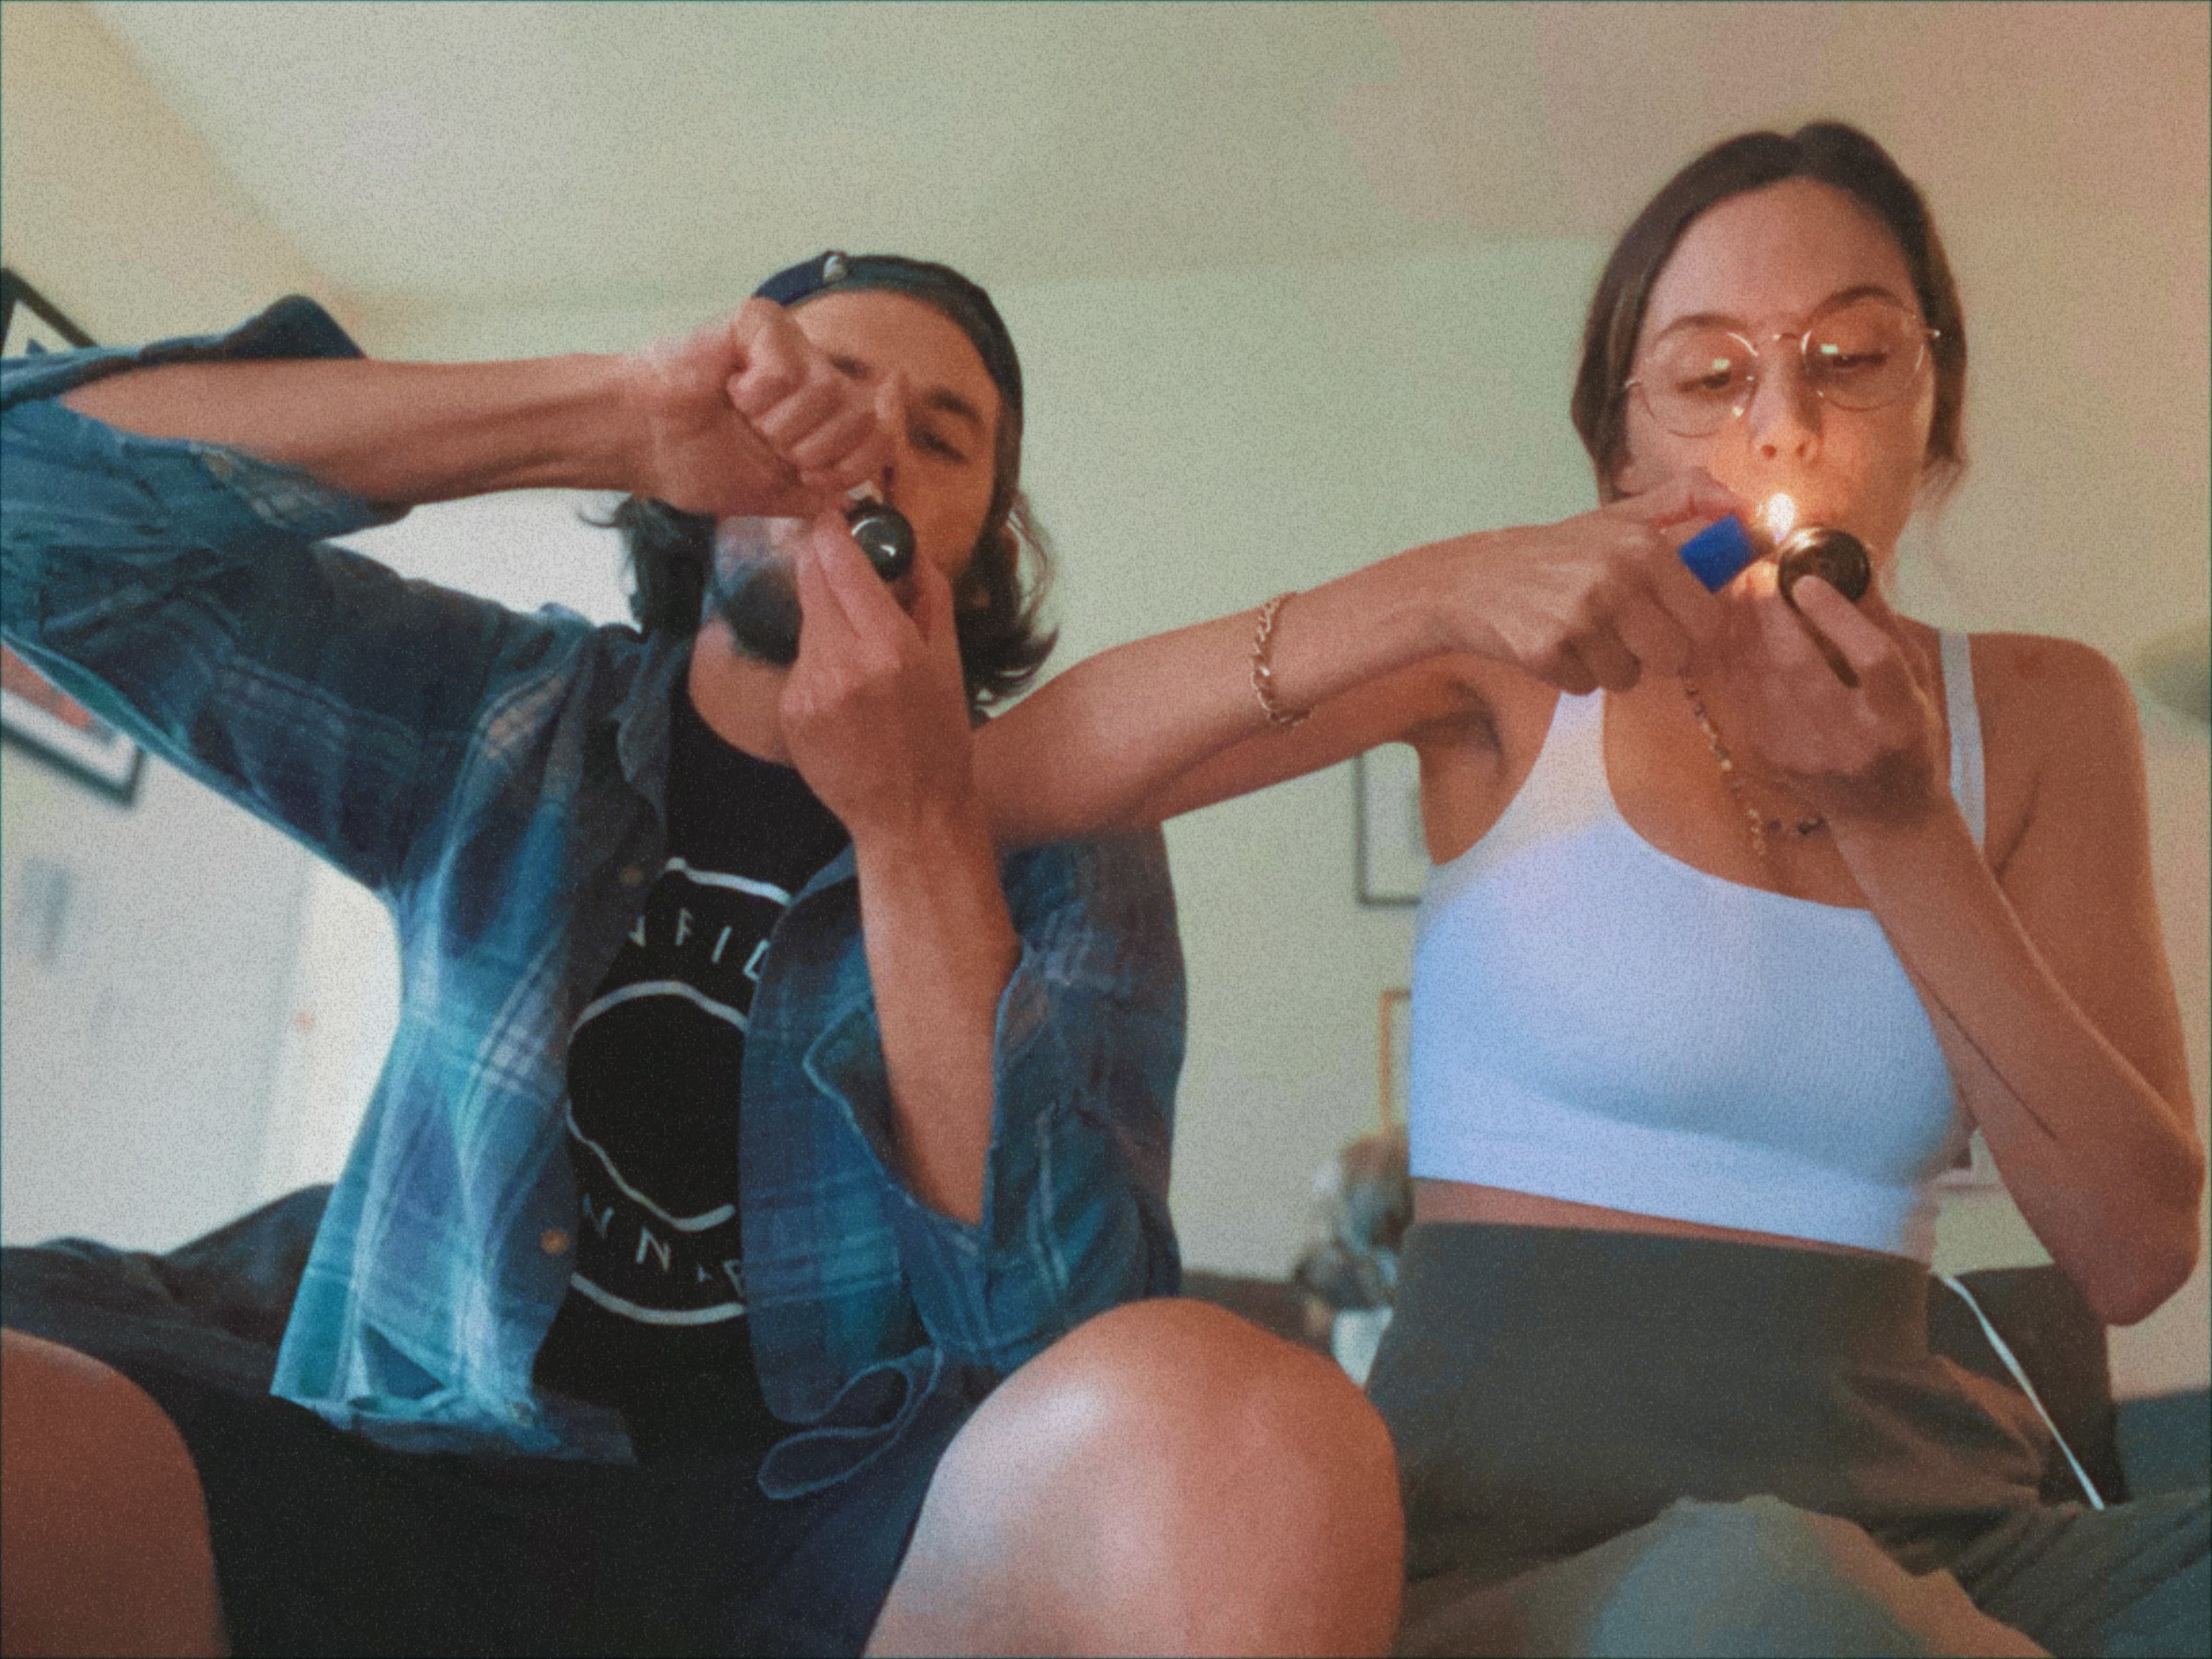 An image of the author&#x27;s boyfriend (left) and the author (right) lighting up pipes to smoke